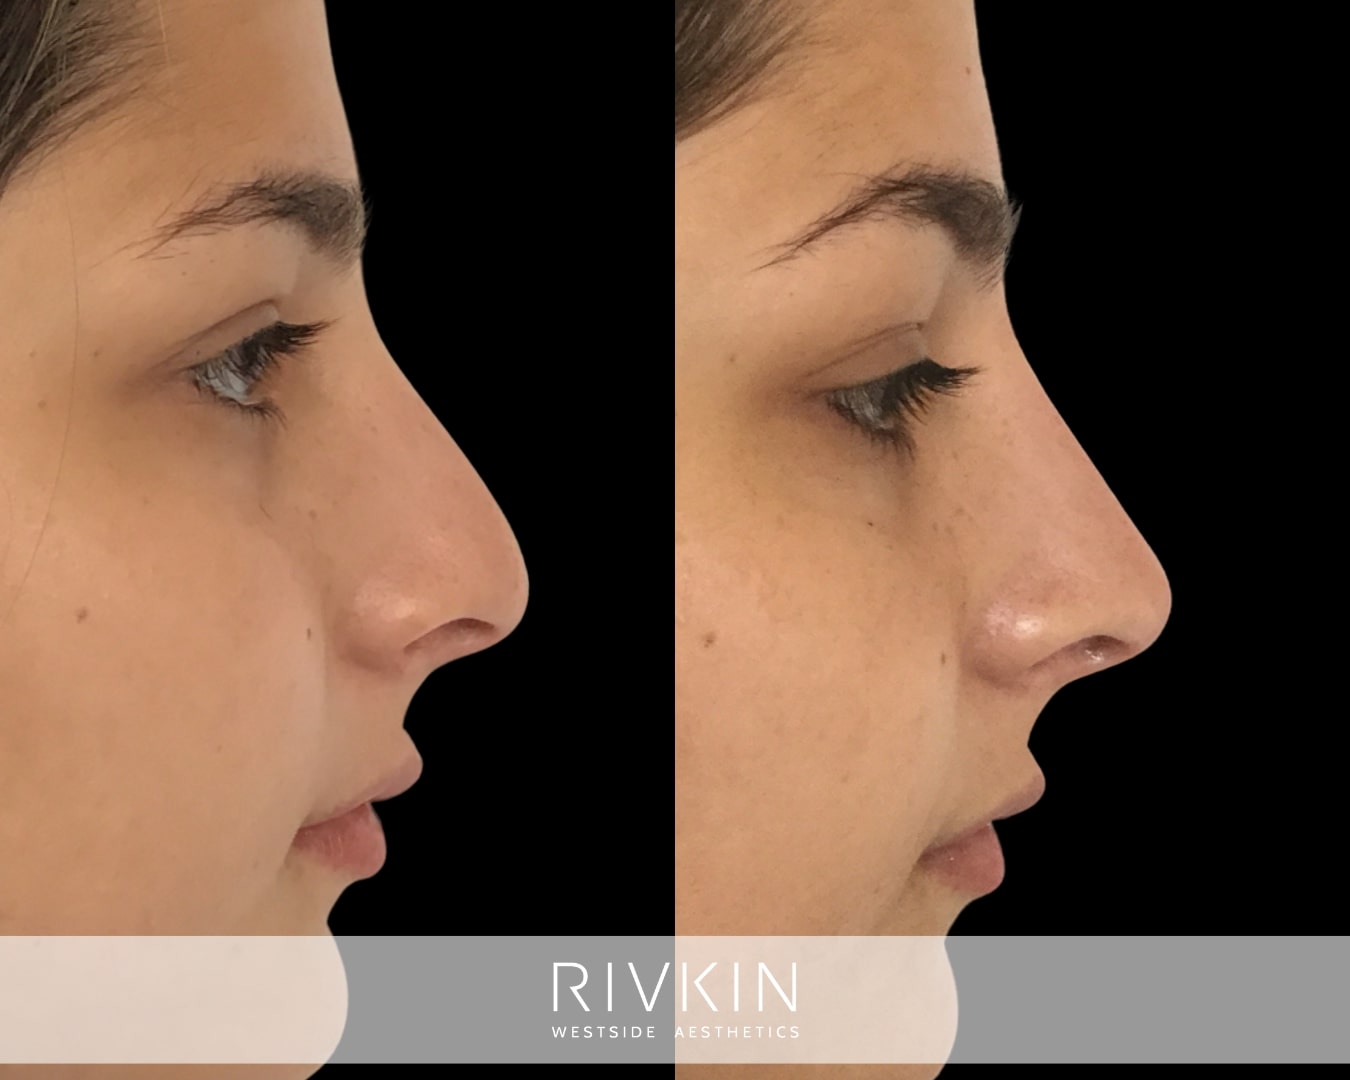 This patient's tip was uplifted for a more harmonious look. The adjustment is very subtle, yet visible and transformative.